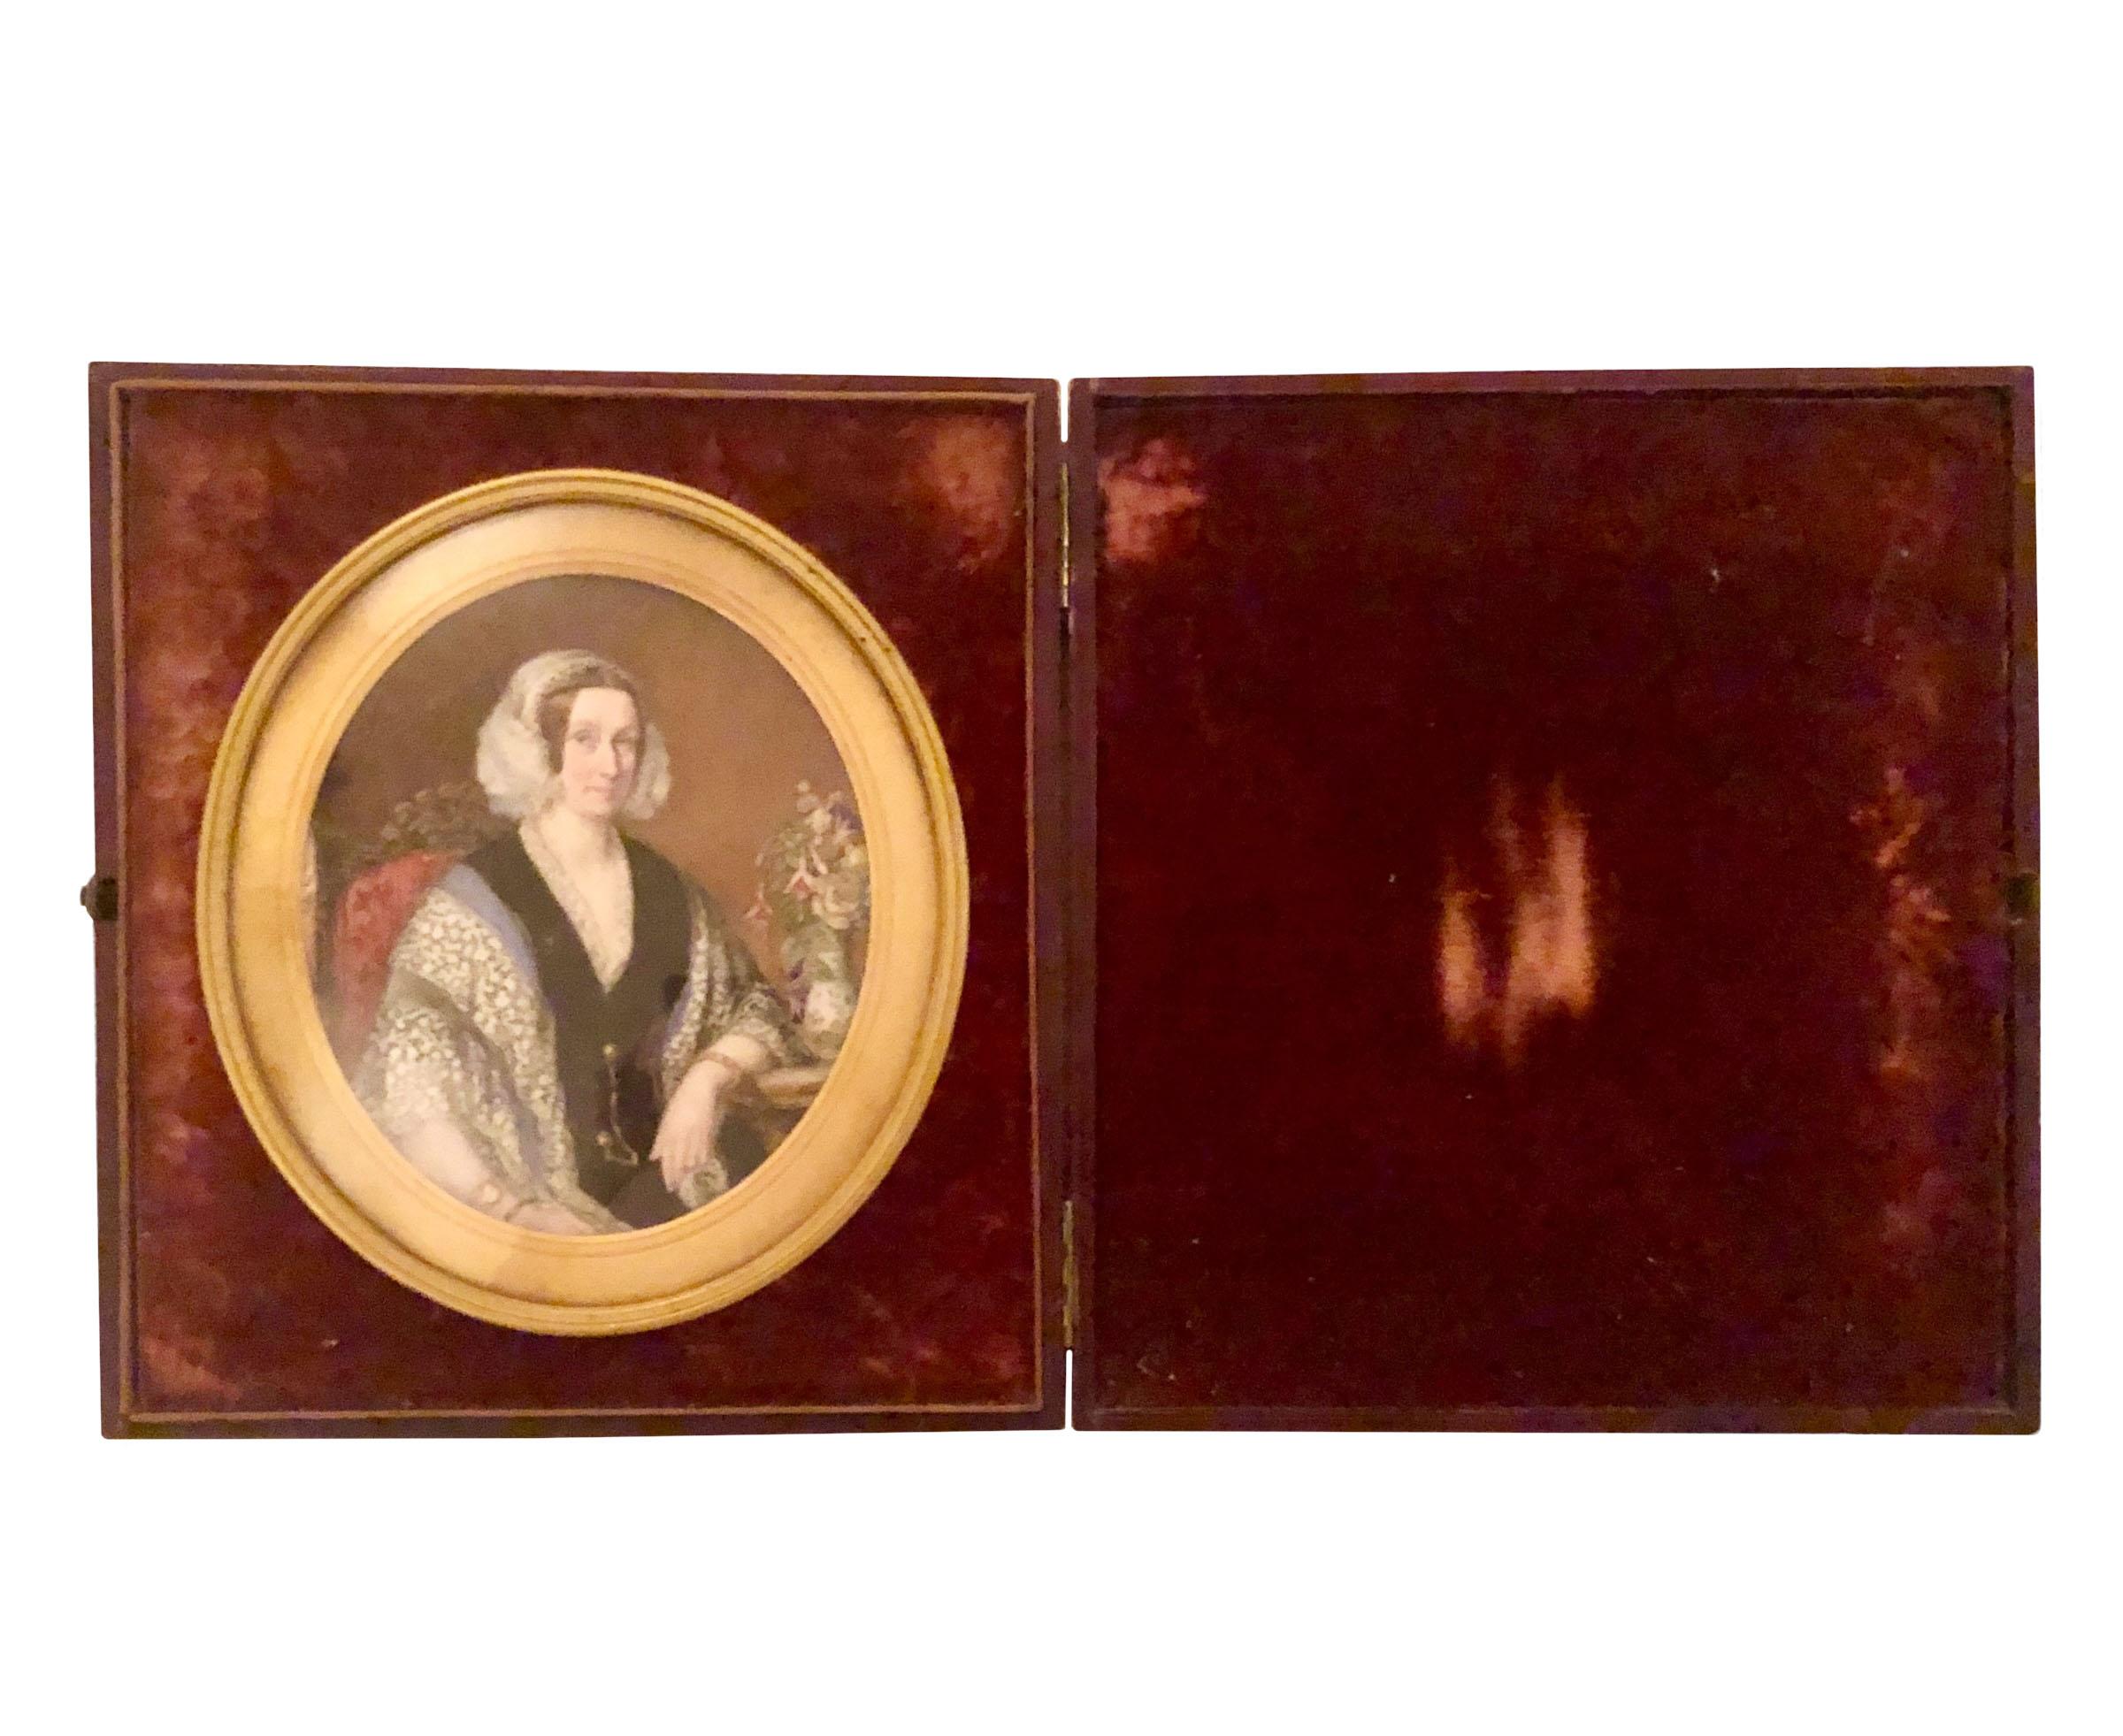 An English regency domed leather portrait box with a doré bronze border and a velvet interior. The box opens to a 19th century painting on ivory. Signed but I can’t make it out. The box has a brass latch.